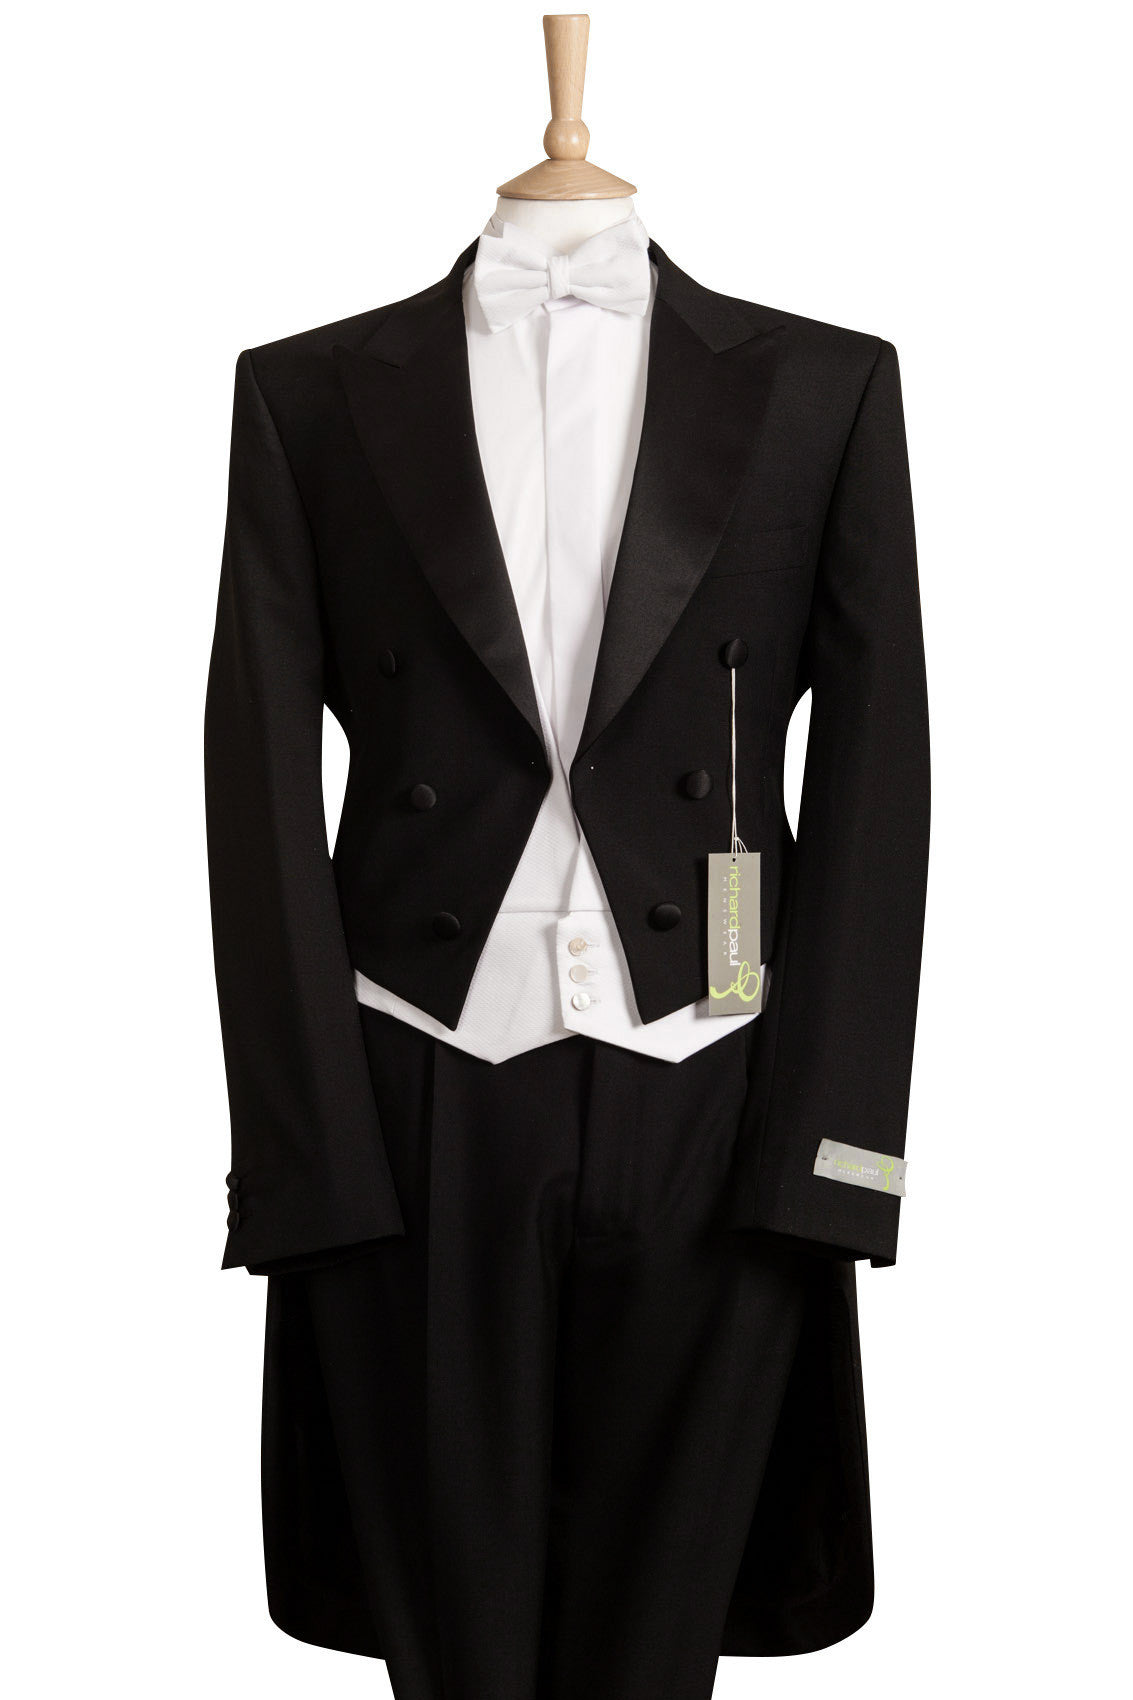 evening tails tailcoat suit mens wear formal event wedding party cruise